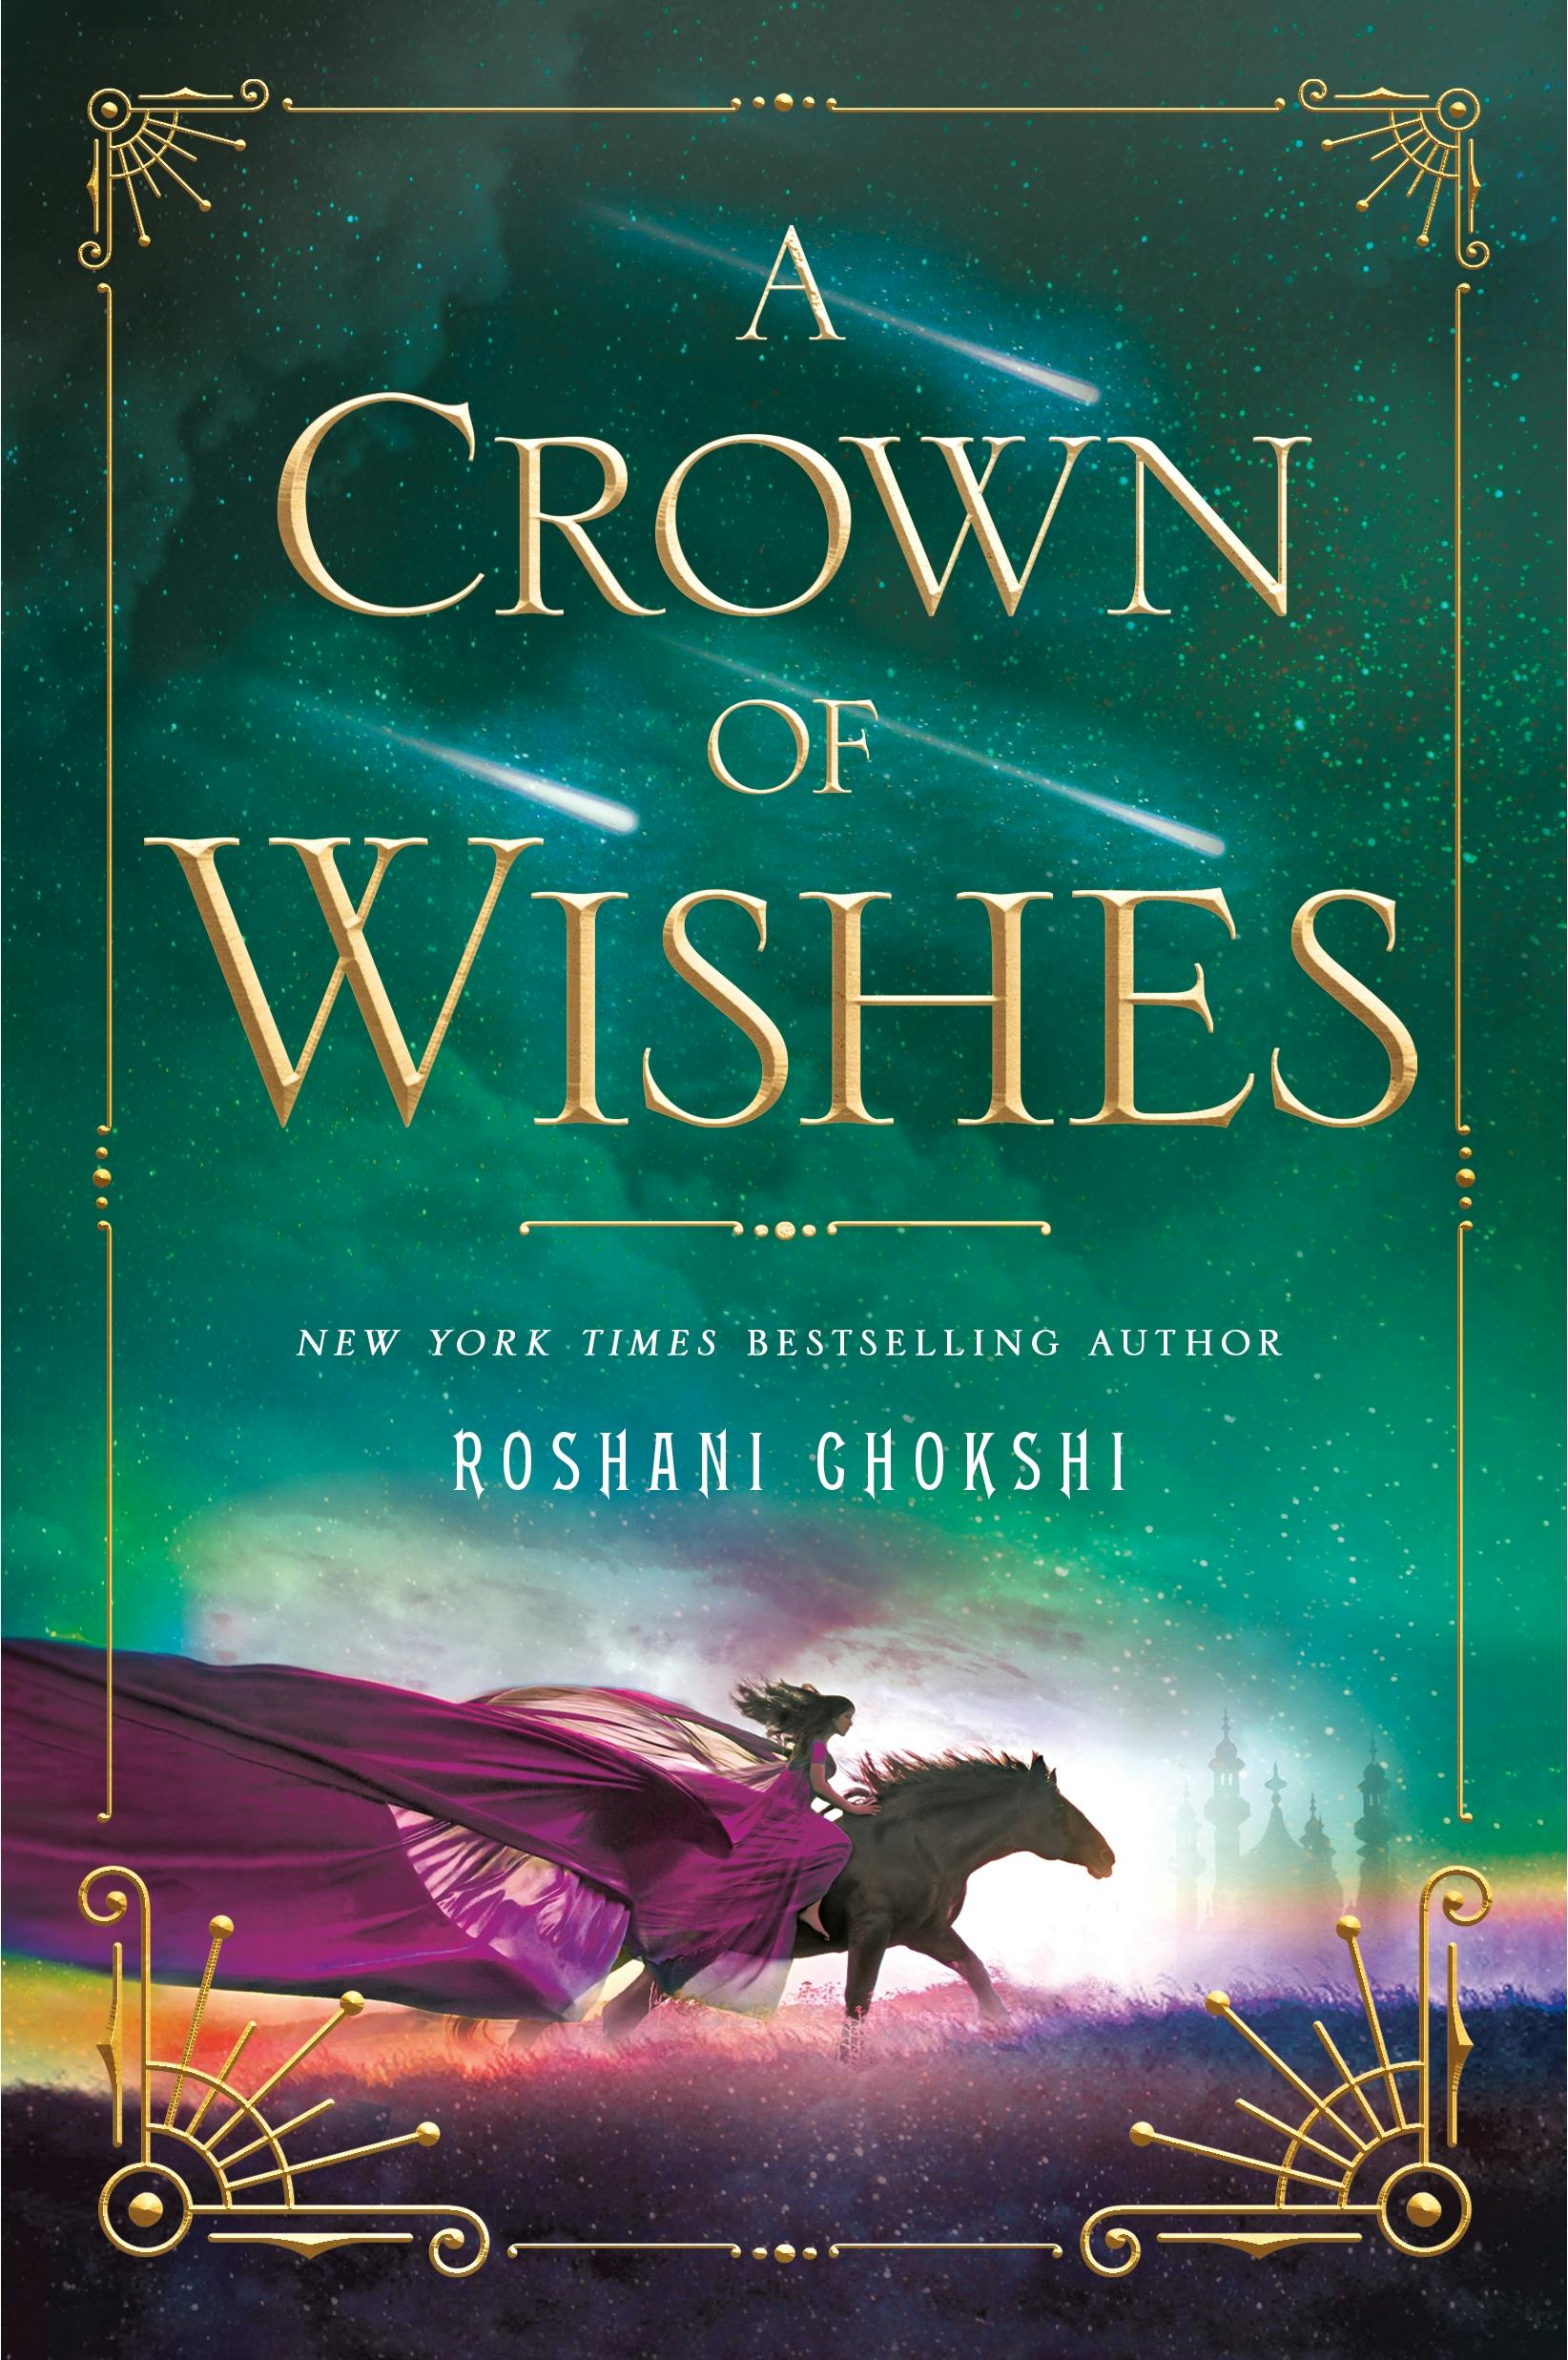 Image of A Crown of Wishes